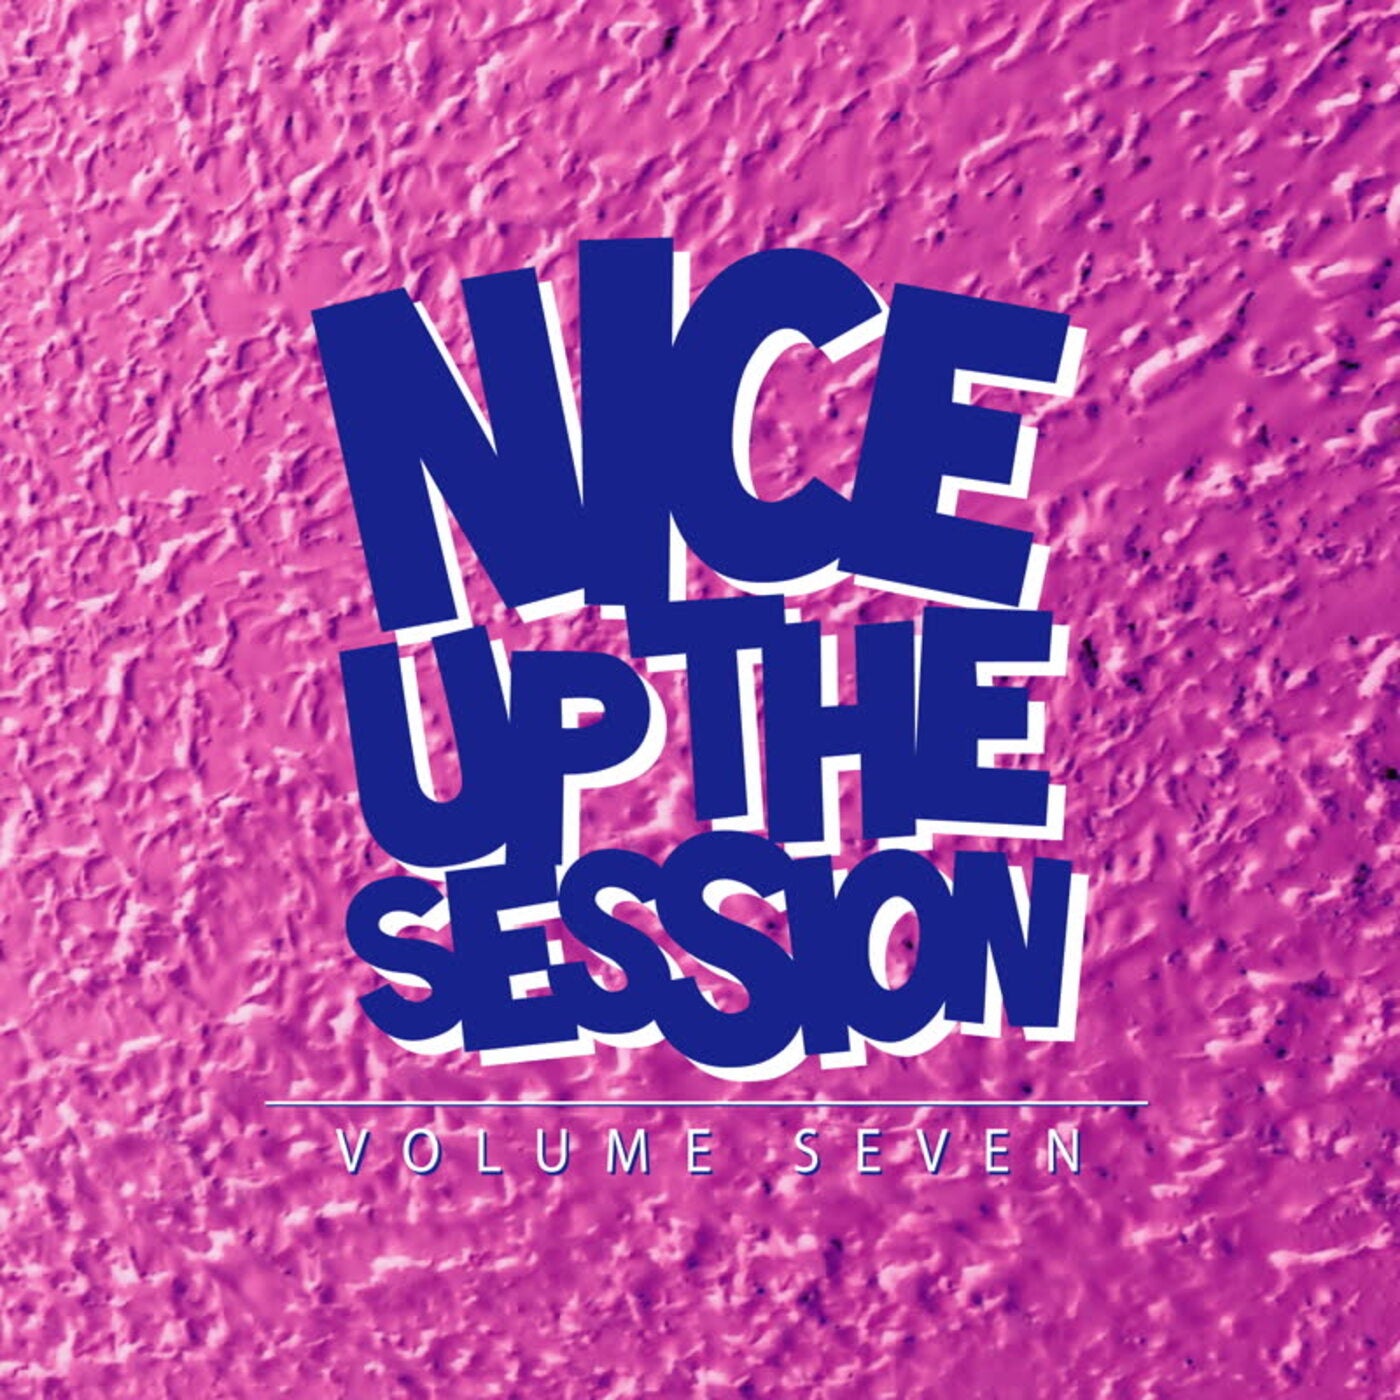 image cover: VA - Nice Up! The Session, Vol. 7 / NUP084